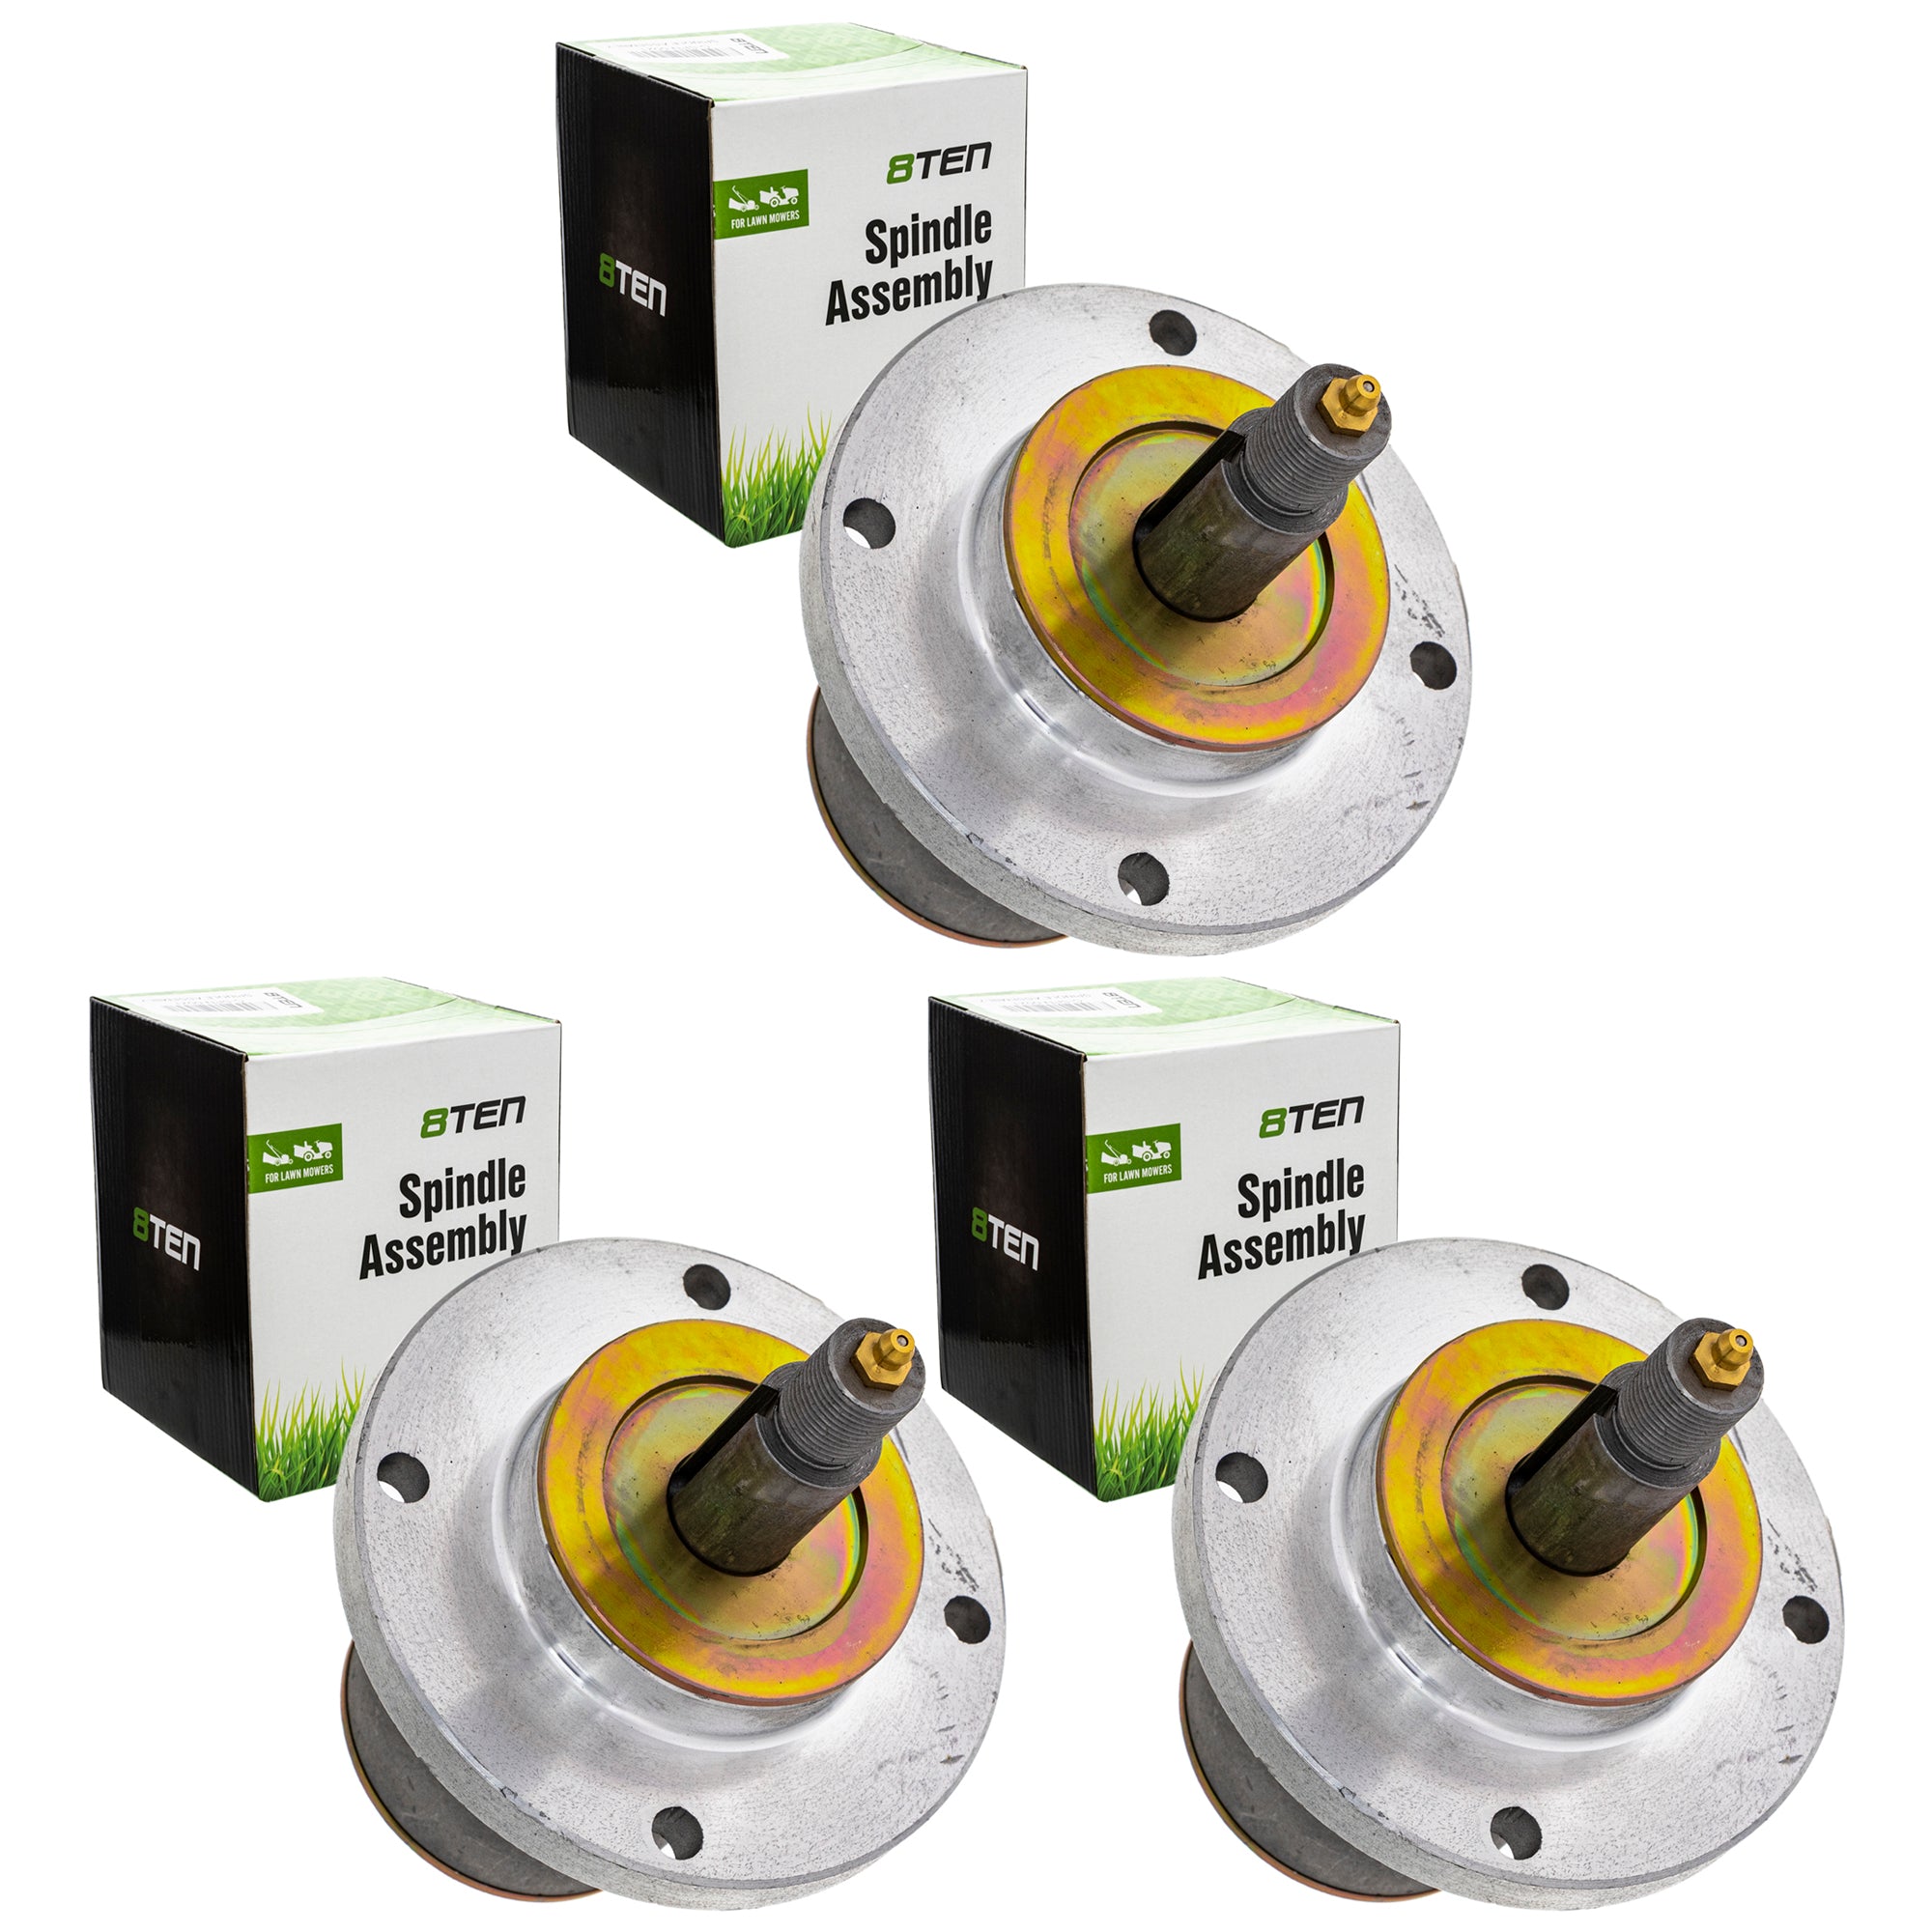 Mower Deck Spindle Set 3-Pack for zOTHER Ferris 8TEN 810-CSP2341N